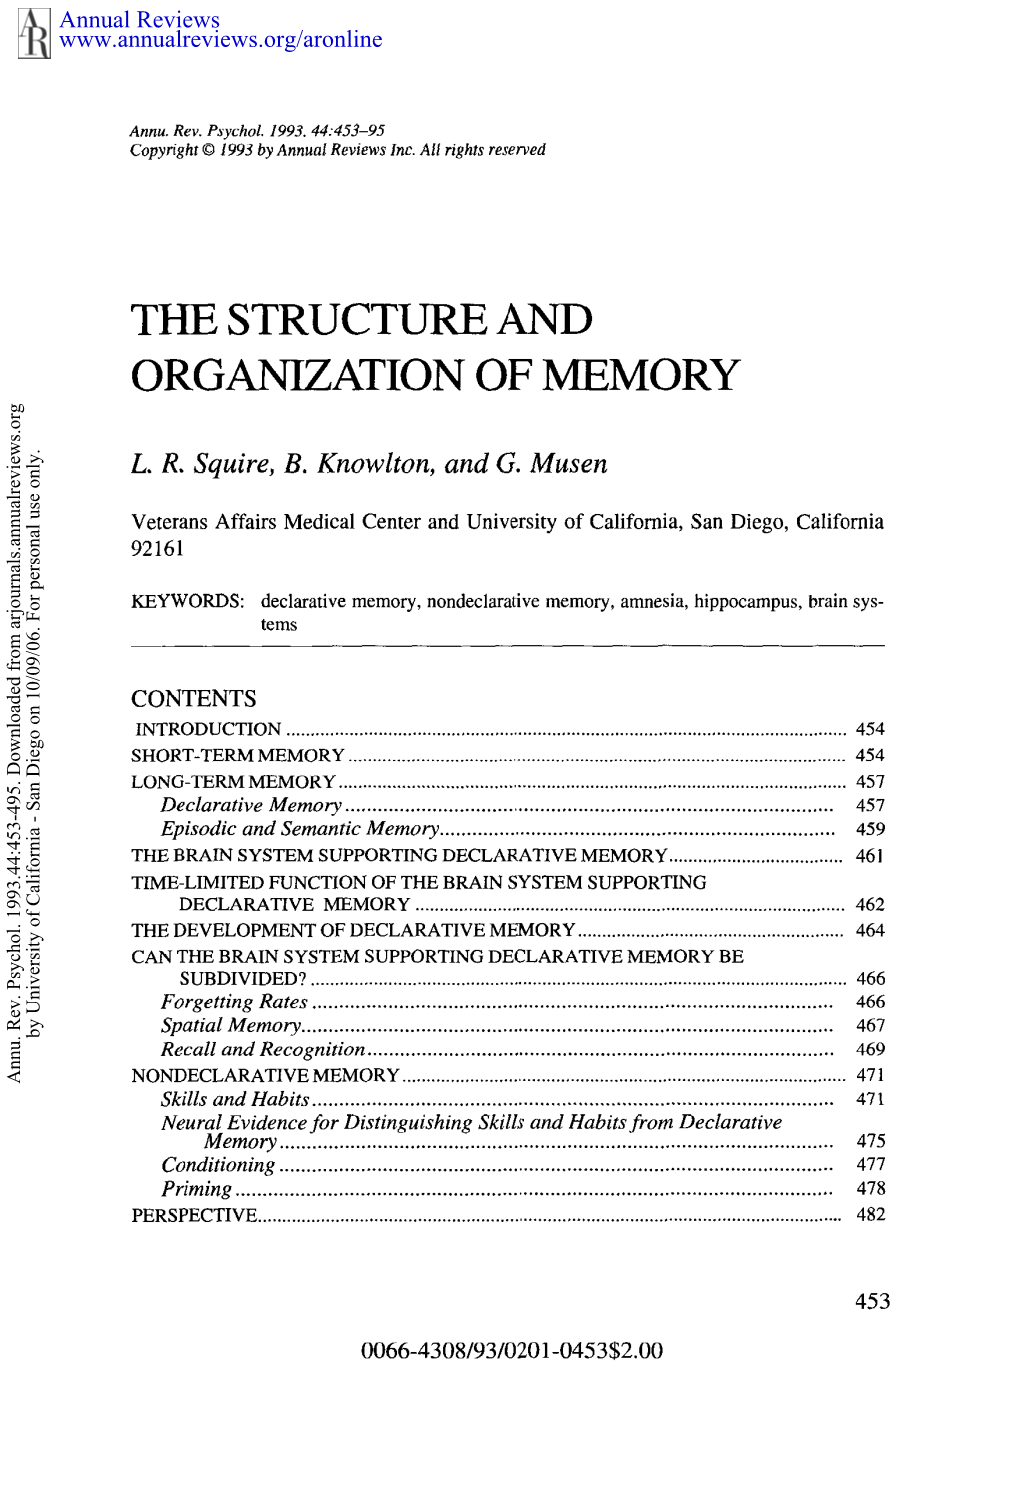 The Structure and Organization of Memory